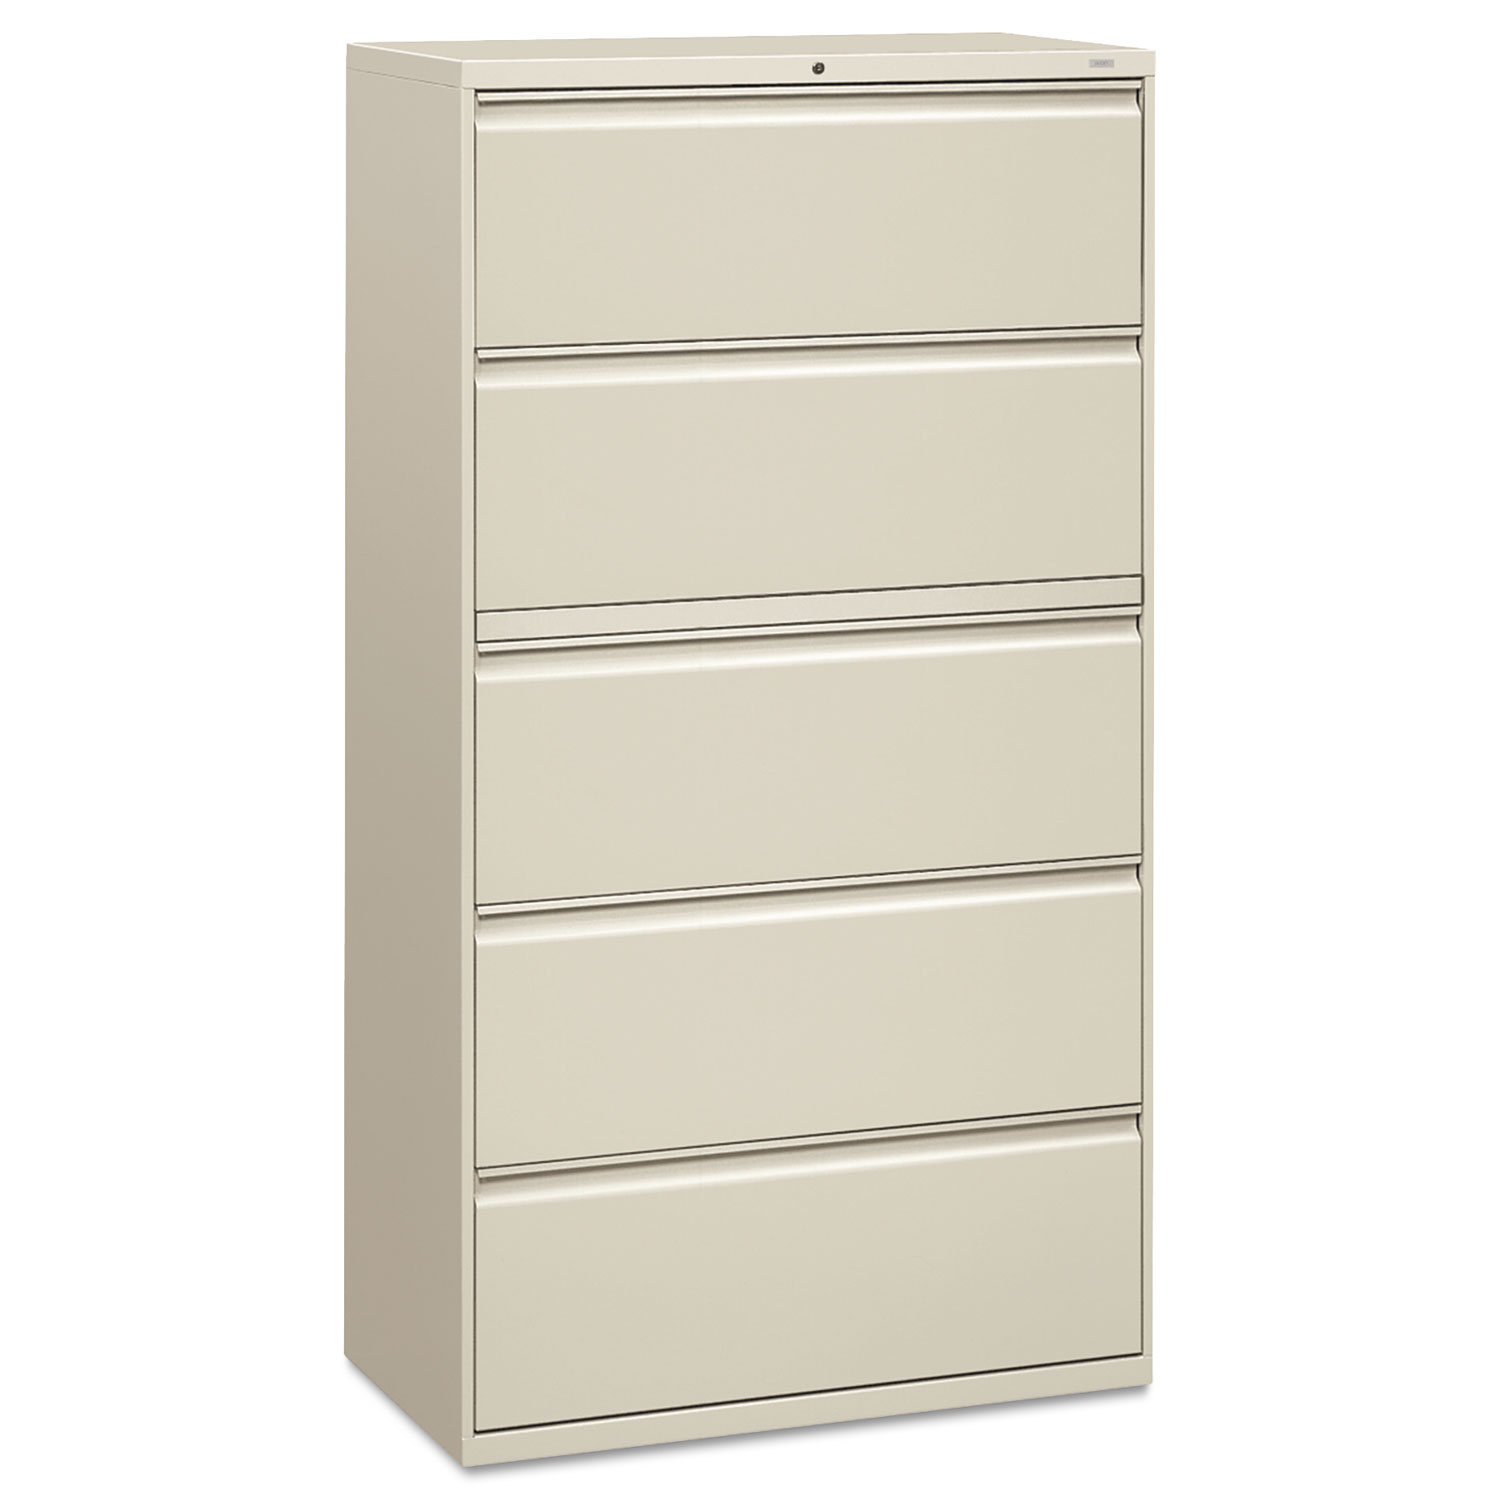 HON 800 Series Five-Drawer Lateral File, Roll-Out/Posting Shelves, 36 x 67, Lt Gray